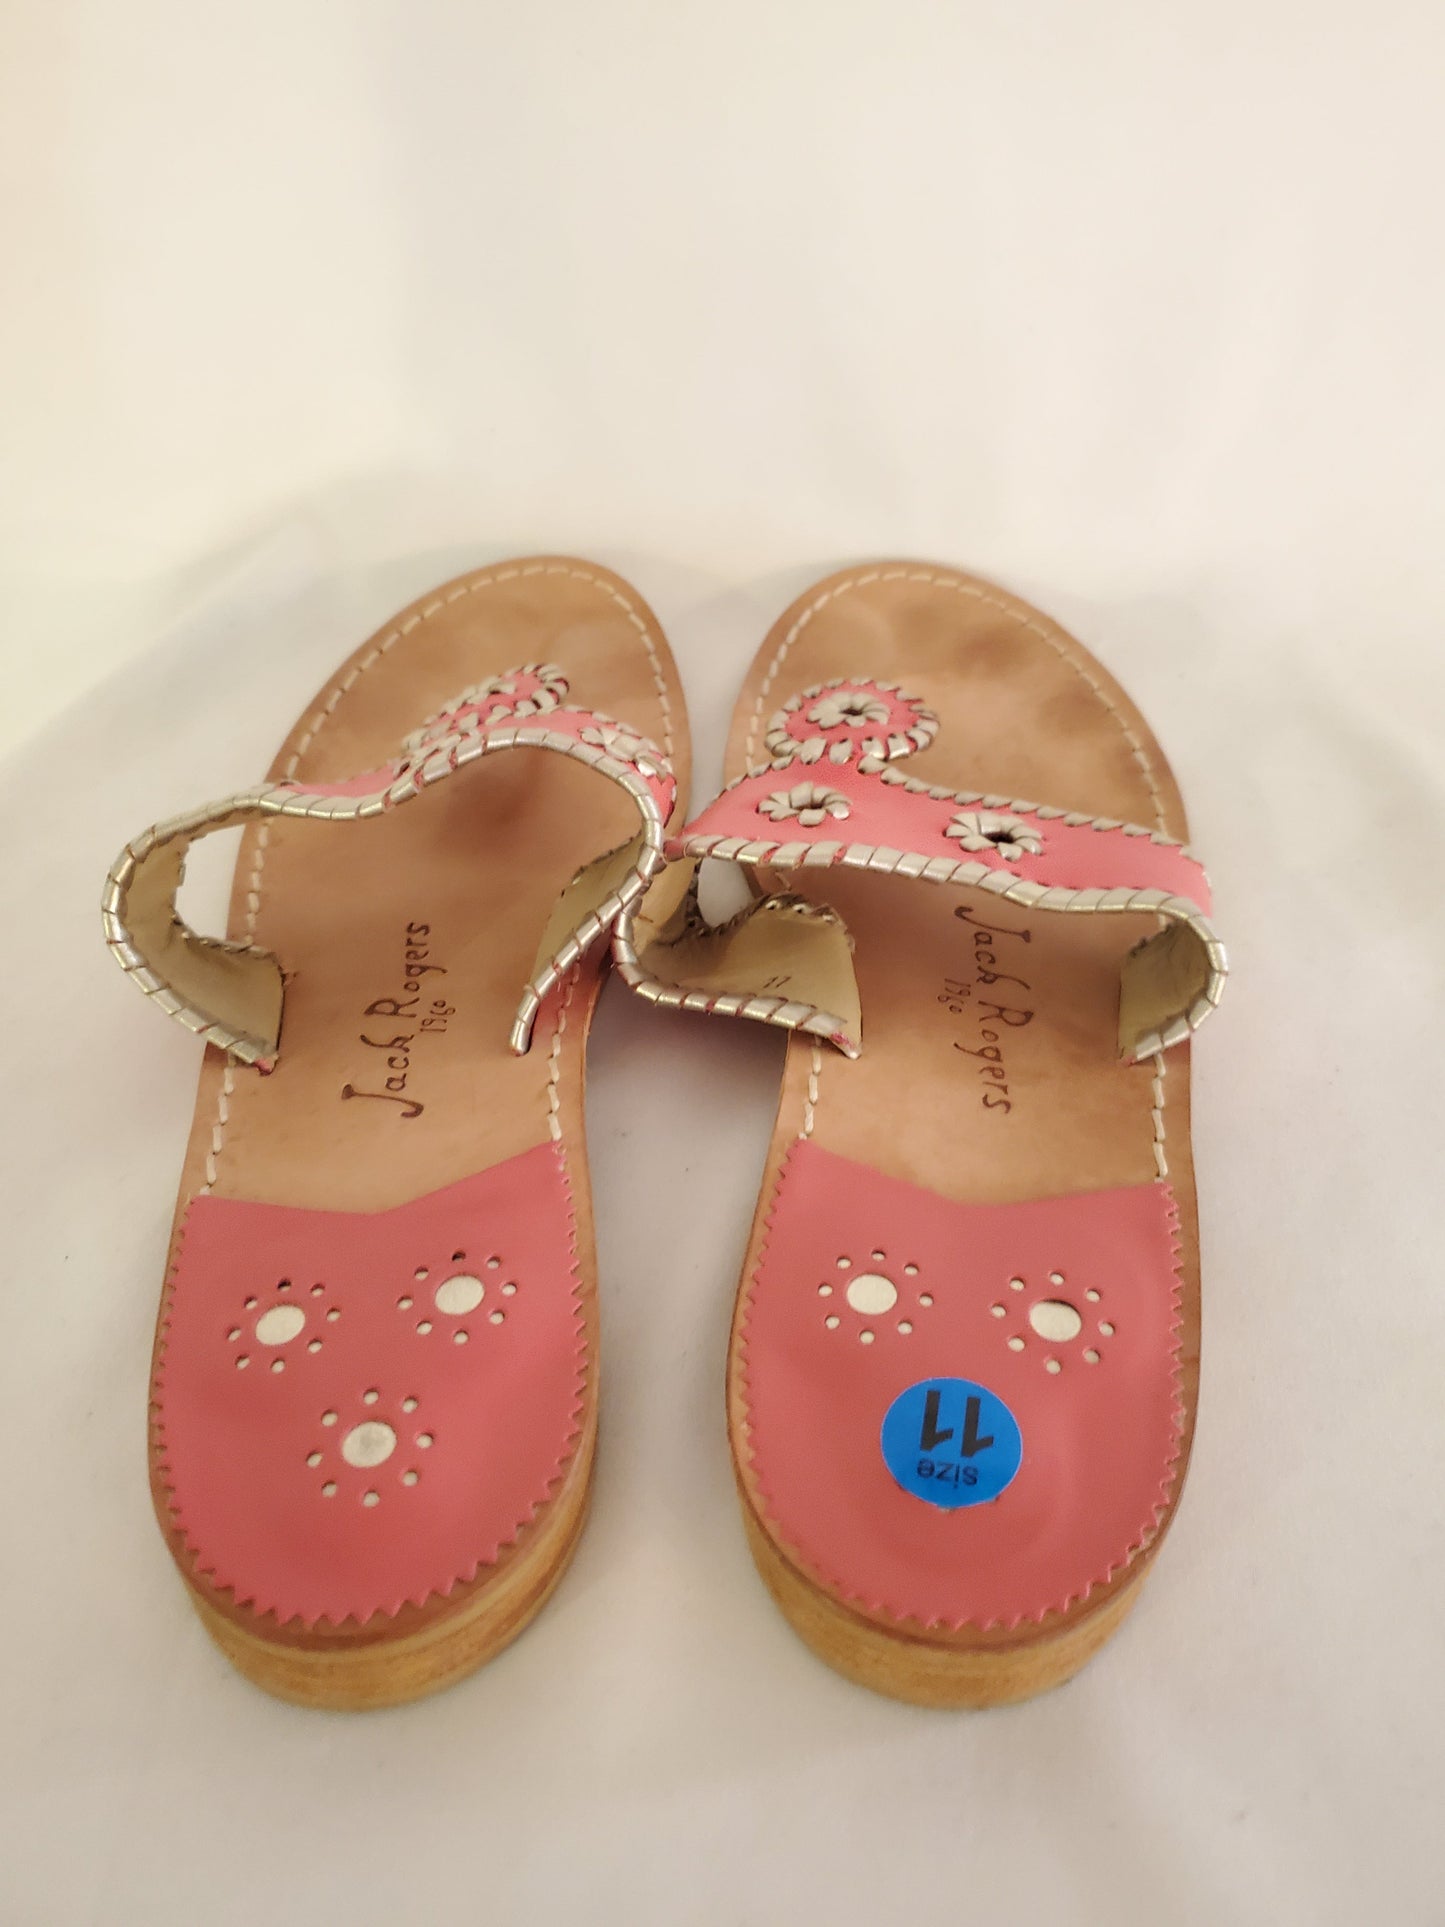 Sandals Flats By Jack Rogers  Size: 11